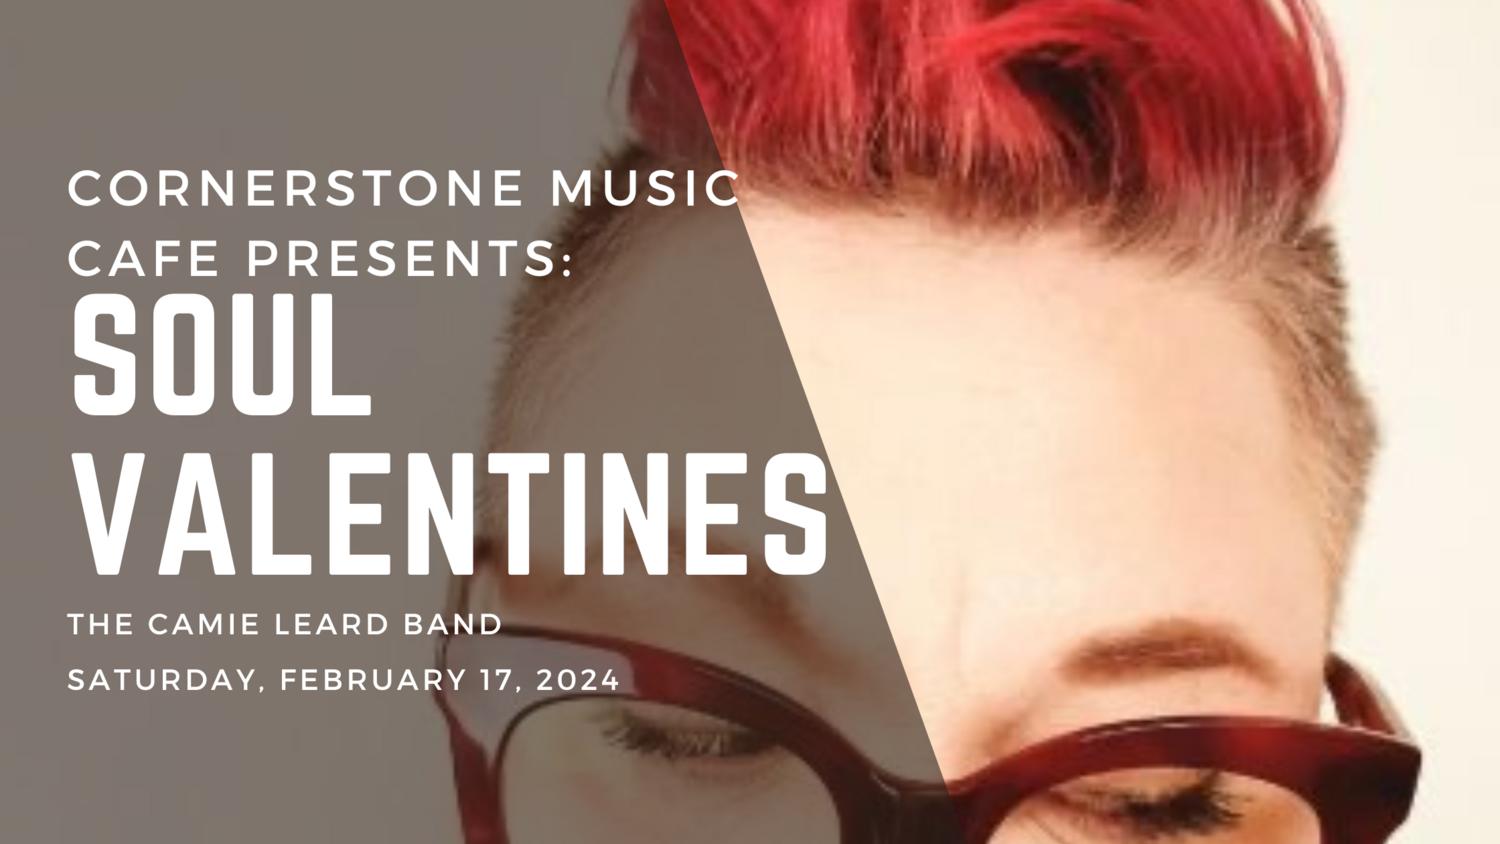 Soul Valentine Concert - 8:00 pm seating
The Camie Leard Band
Saturday, February 17, 2024